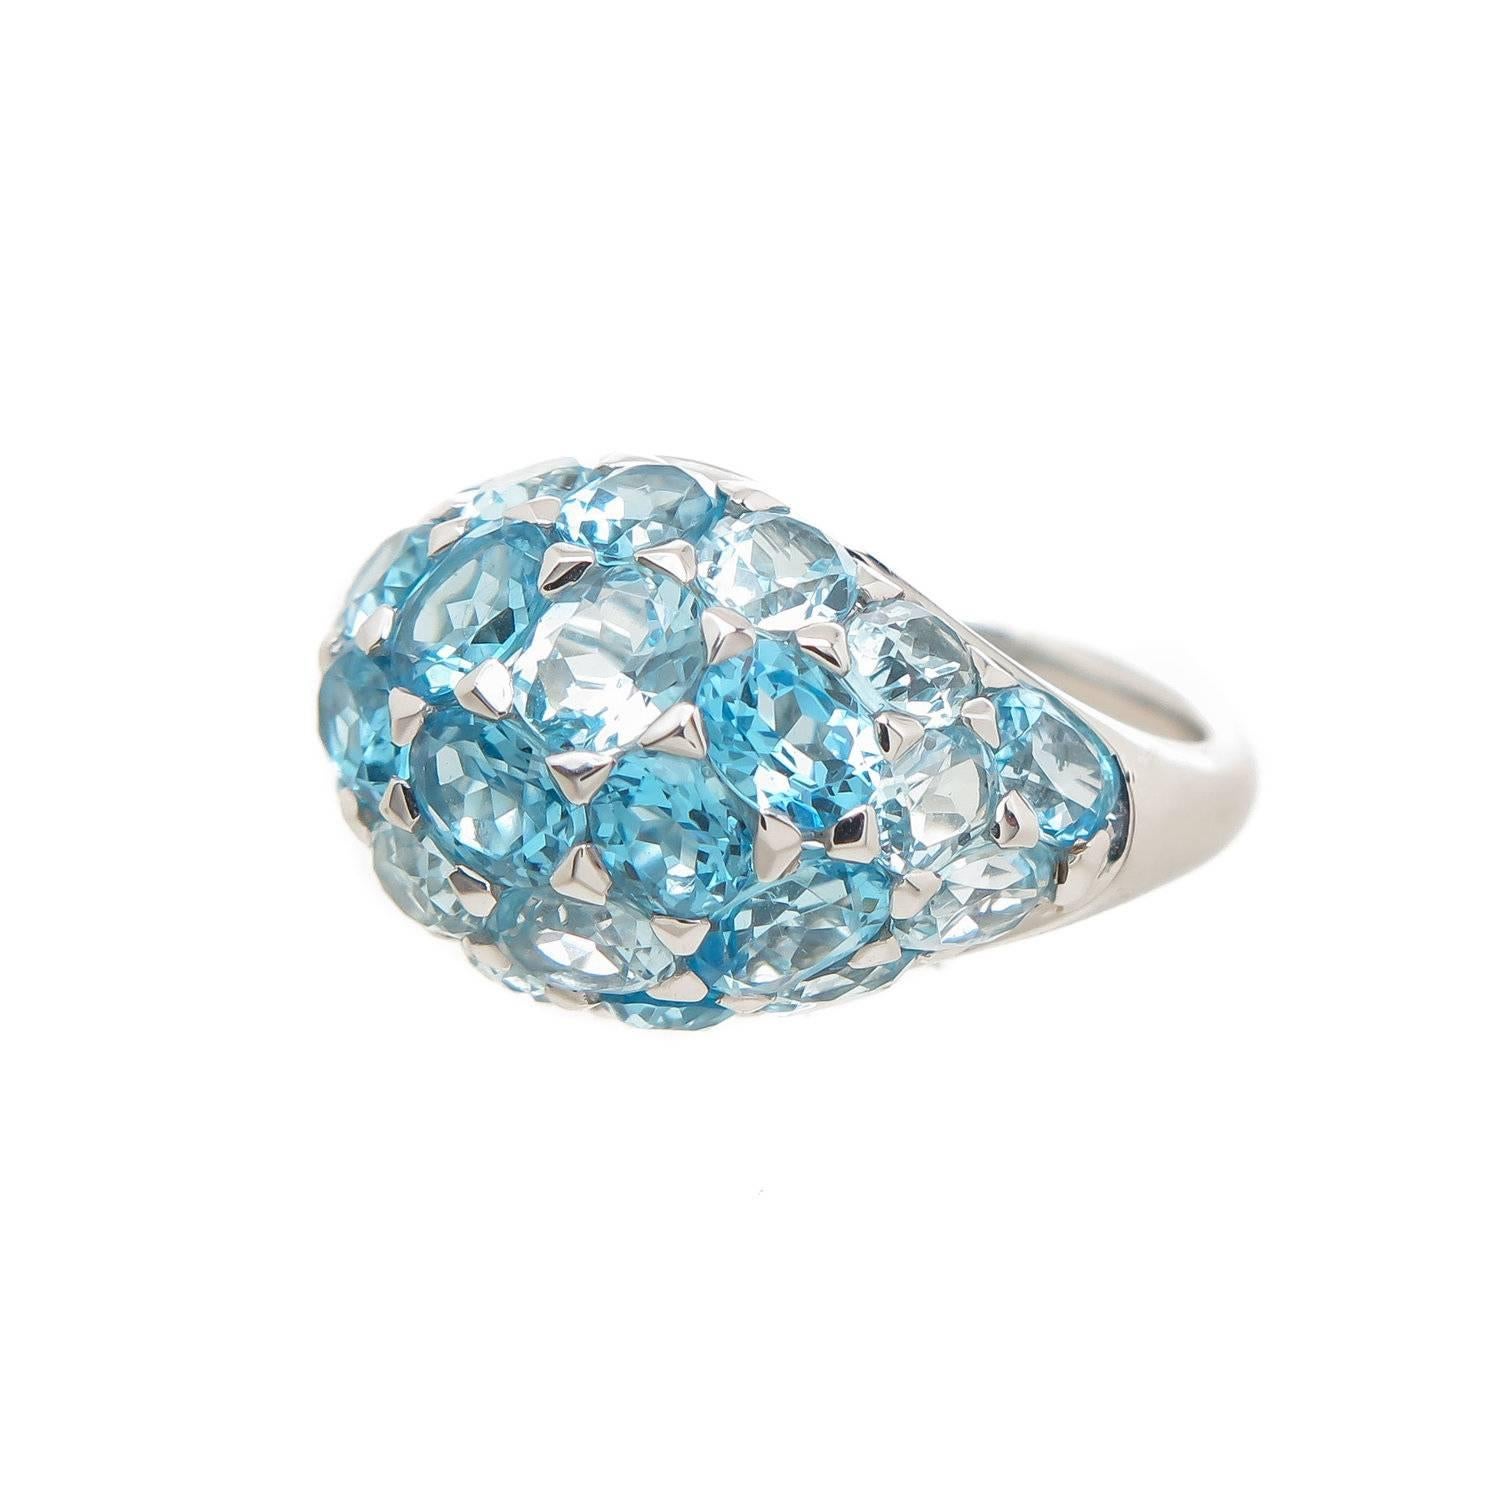 Multi color blue topaz ring , with oval shaped topazes in hand picked several blue shades offering a lustrous look. Topazes weighing approx 7.13cts , set in 18k white gold.
Ring can be sized 1 size up or down. This ring is size 5 3/4 .
